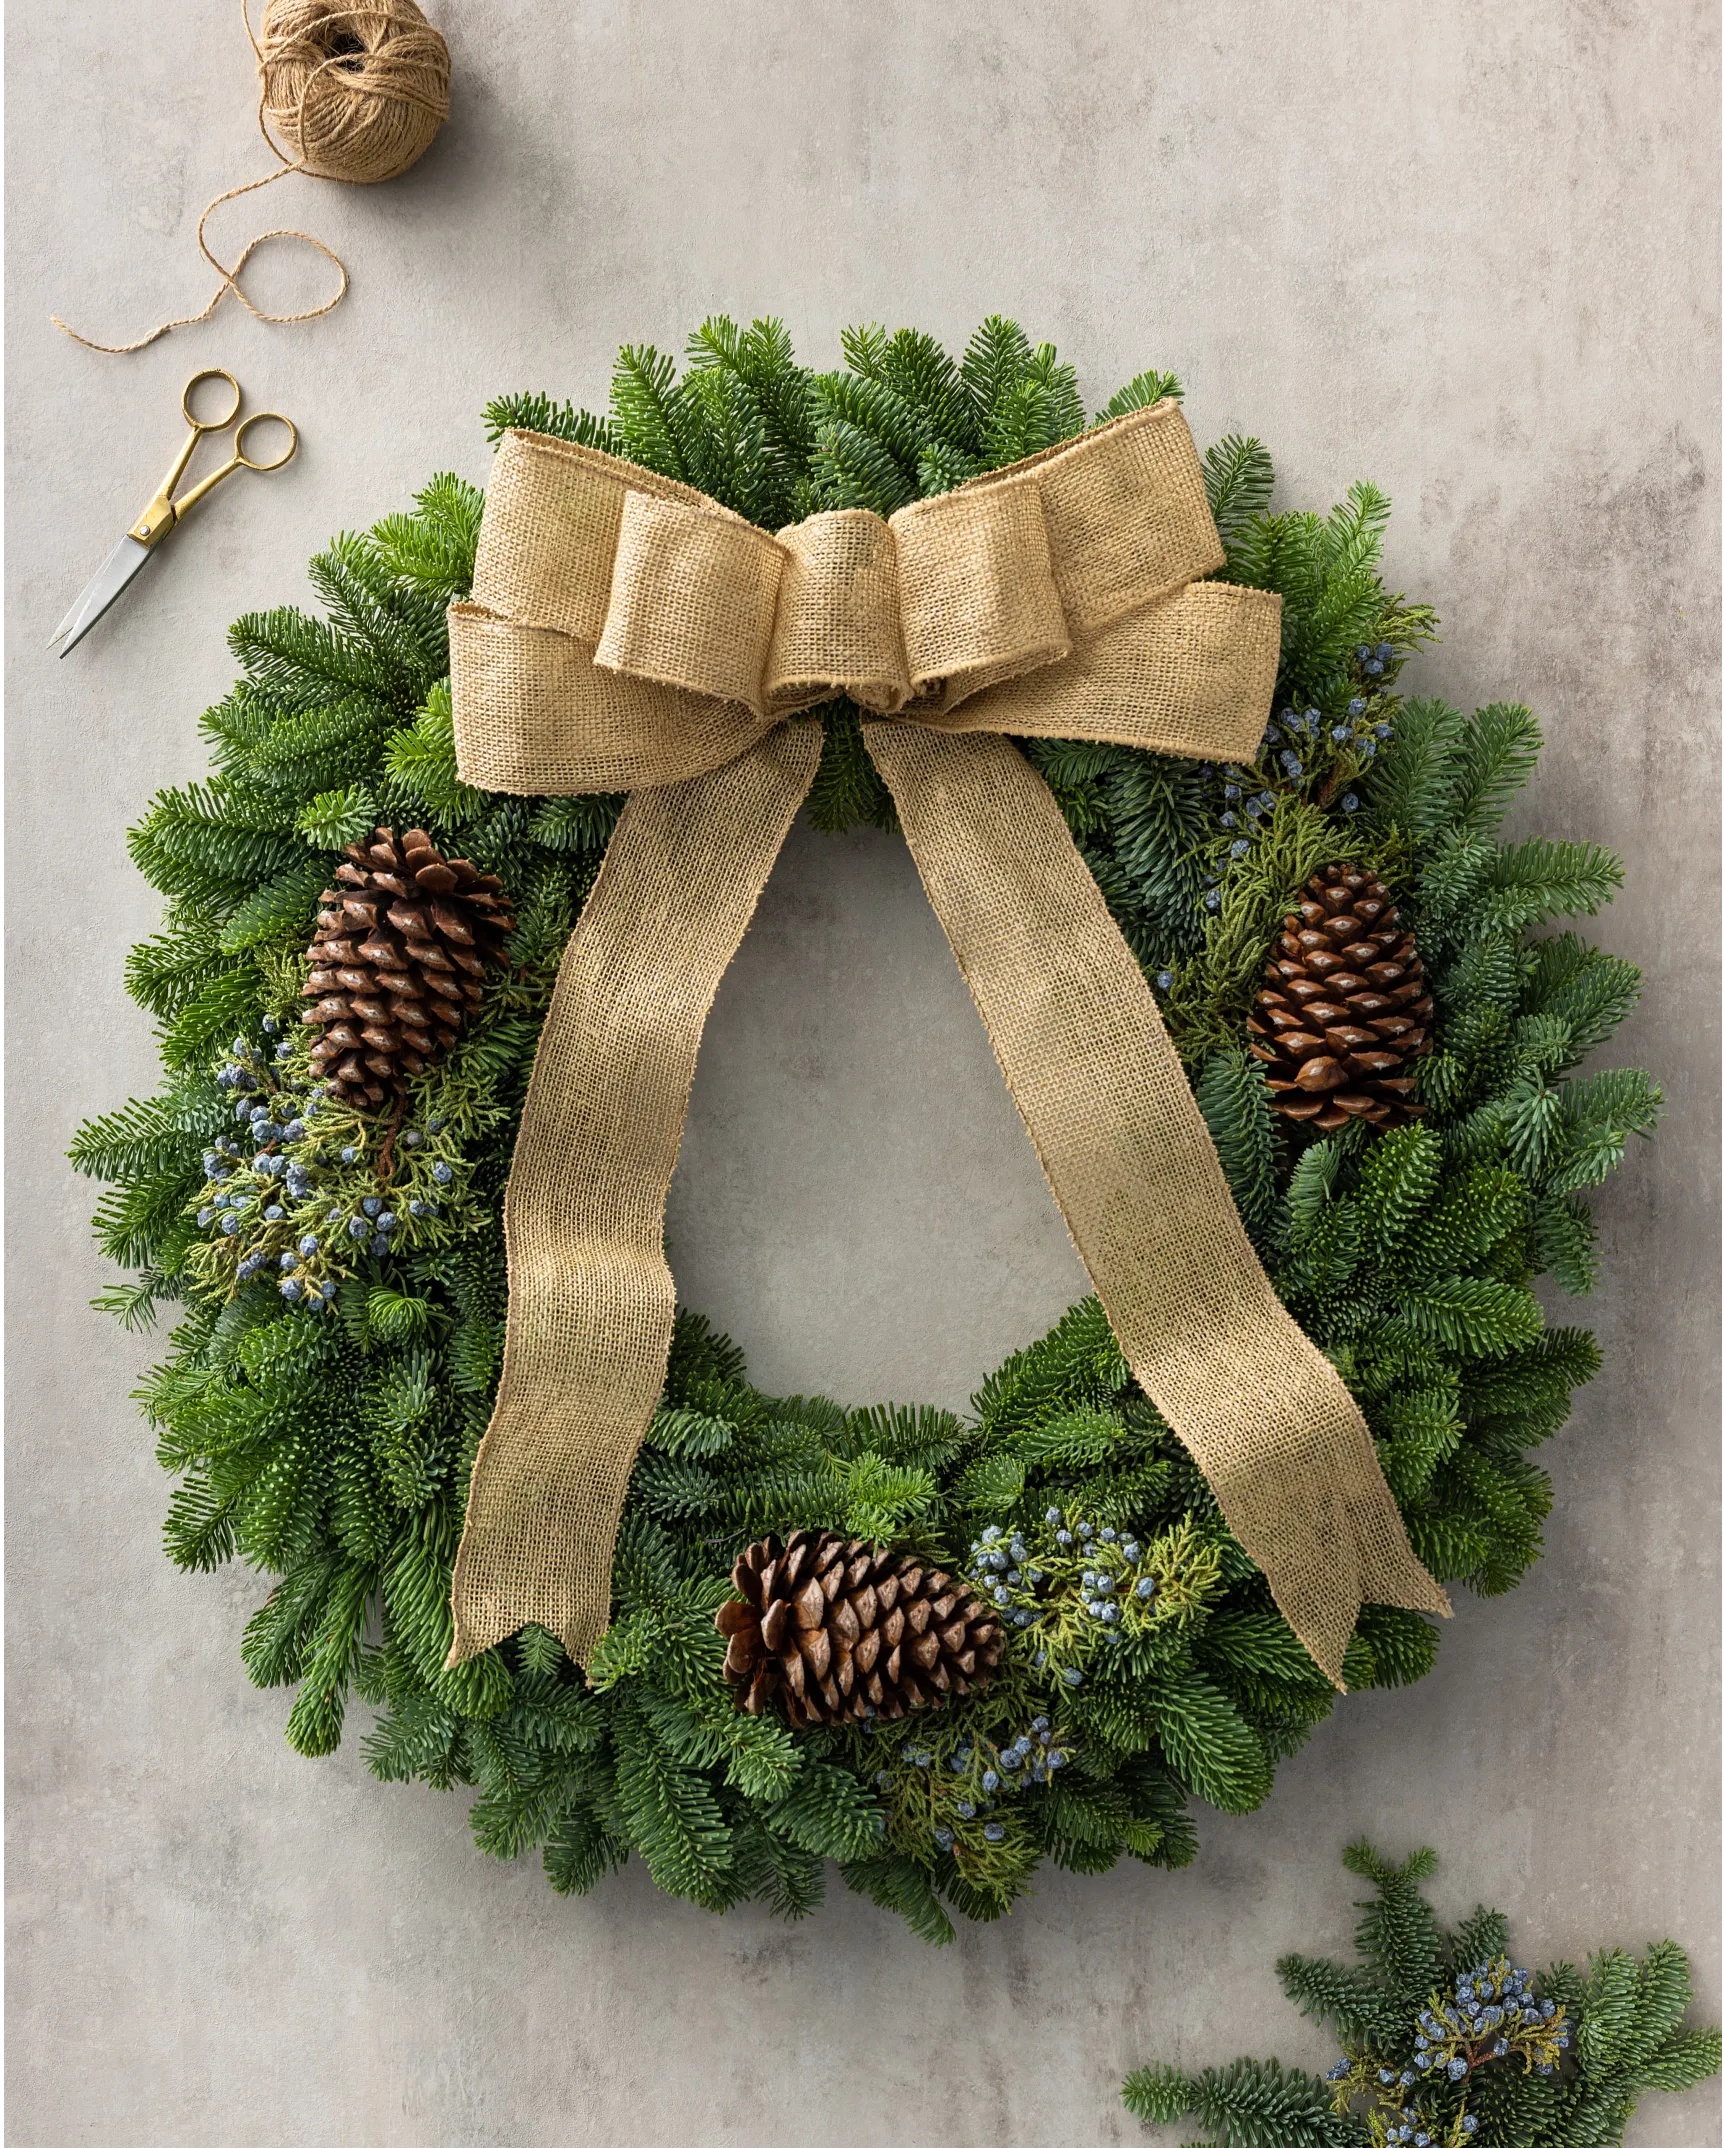 30 Ways to Use Fresh Evergreen Boughs